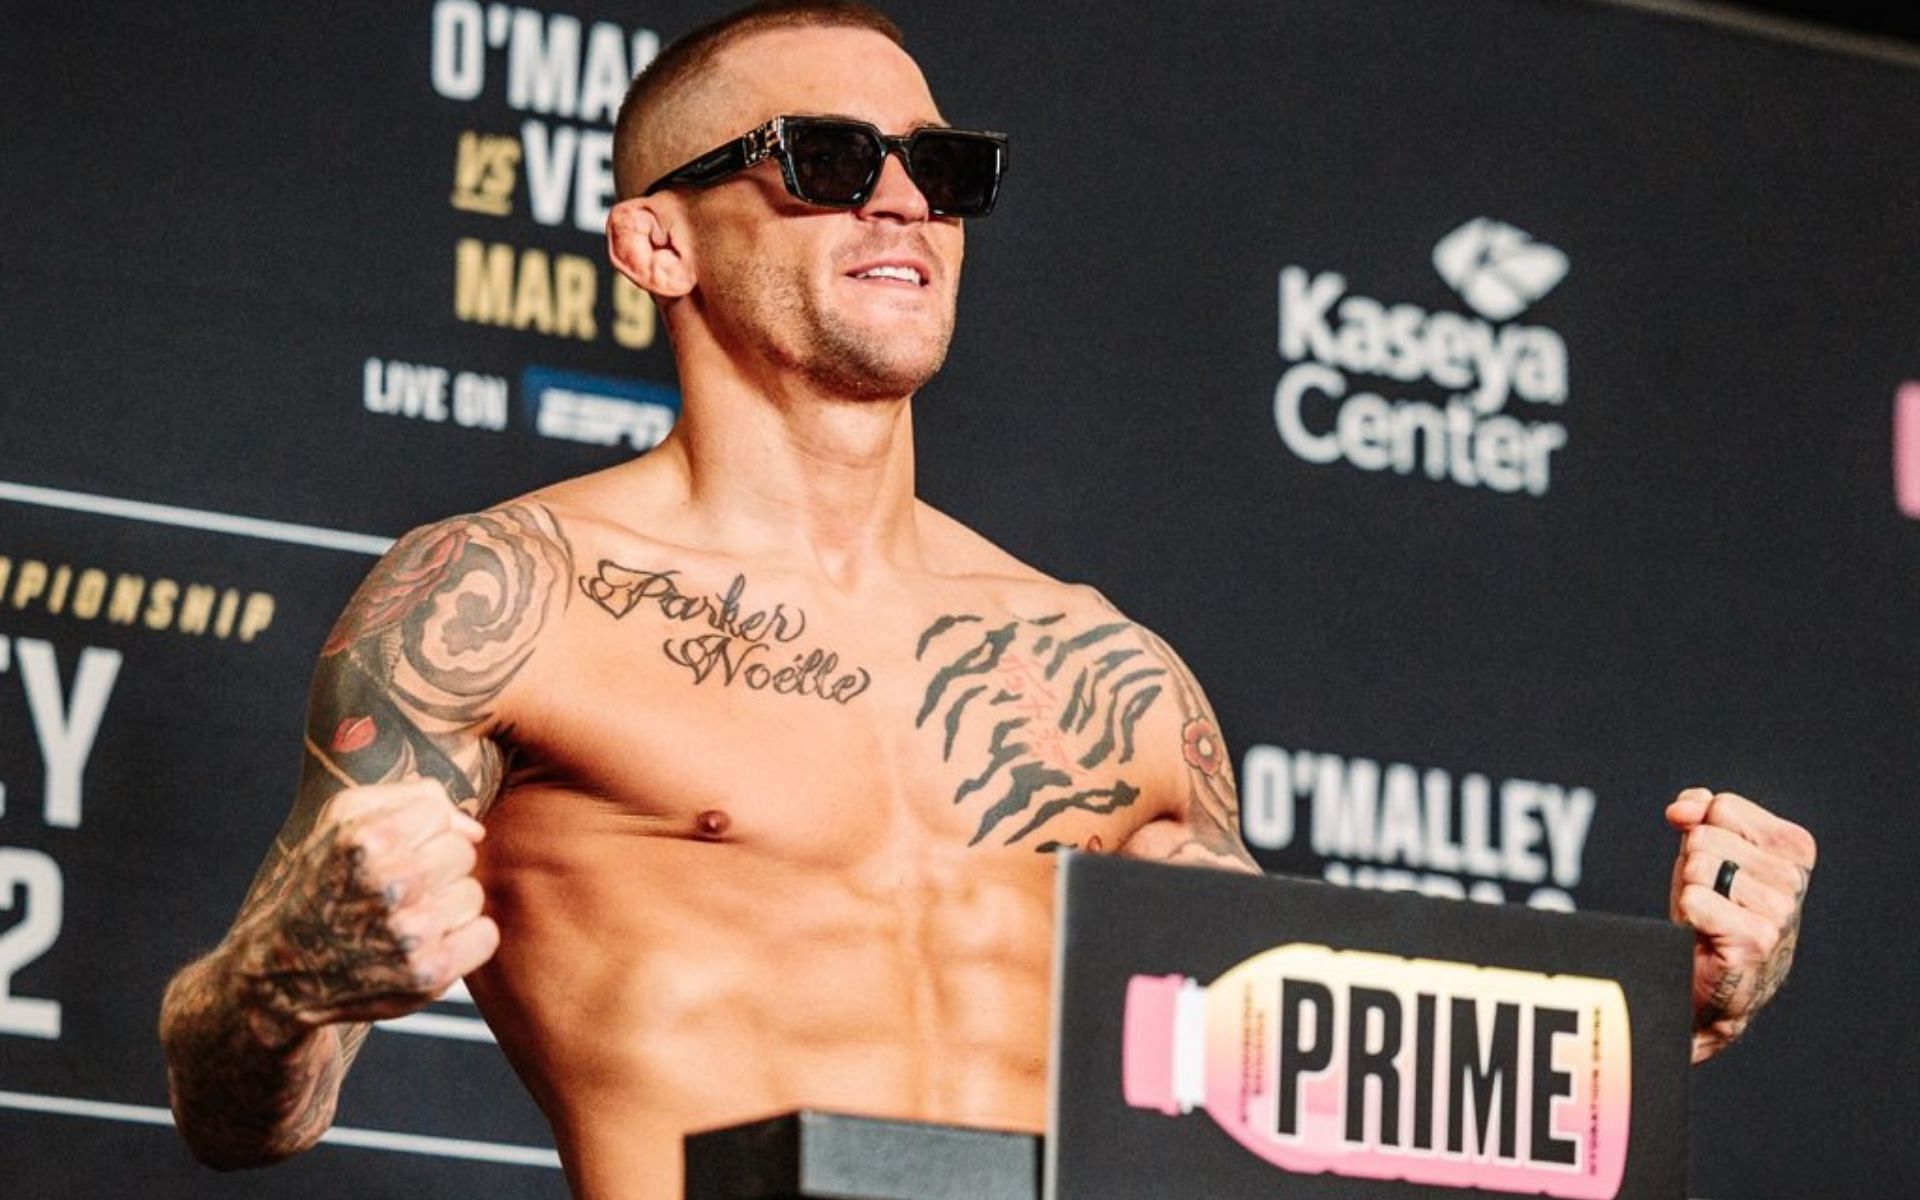 Dustin Poirier will hope to become a first-time undisputed champion late into his UFC career next weekend